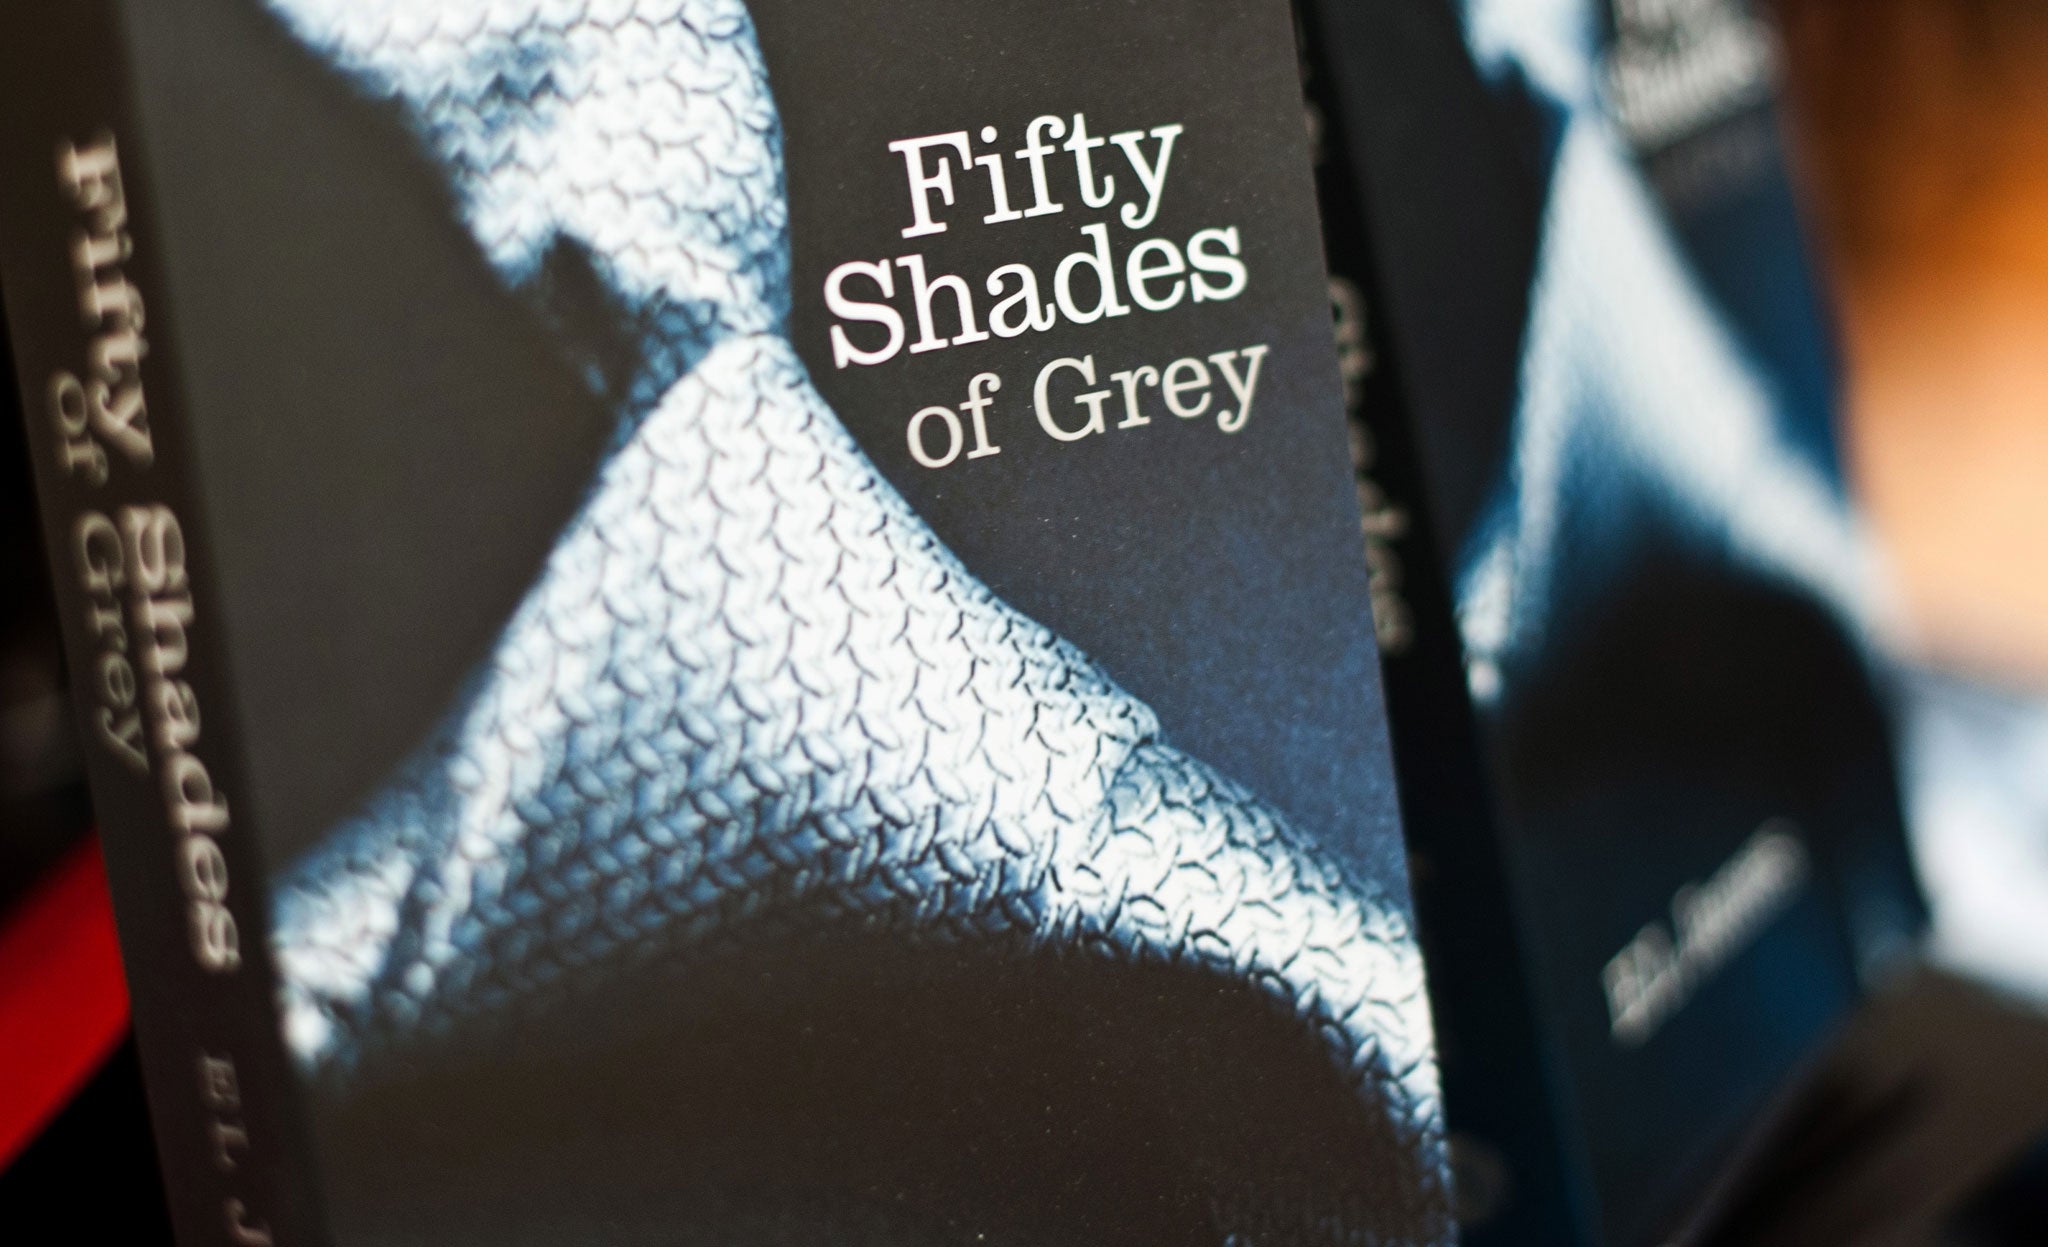 The book will be the fourth in the Fifty Shades of Grey series